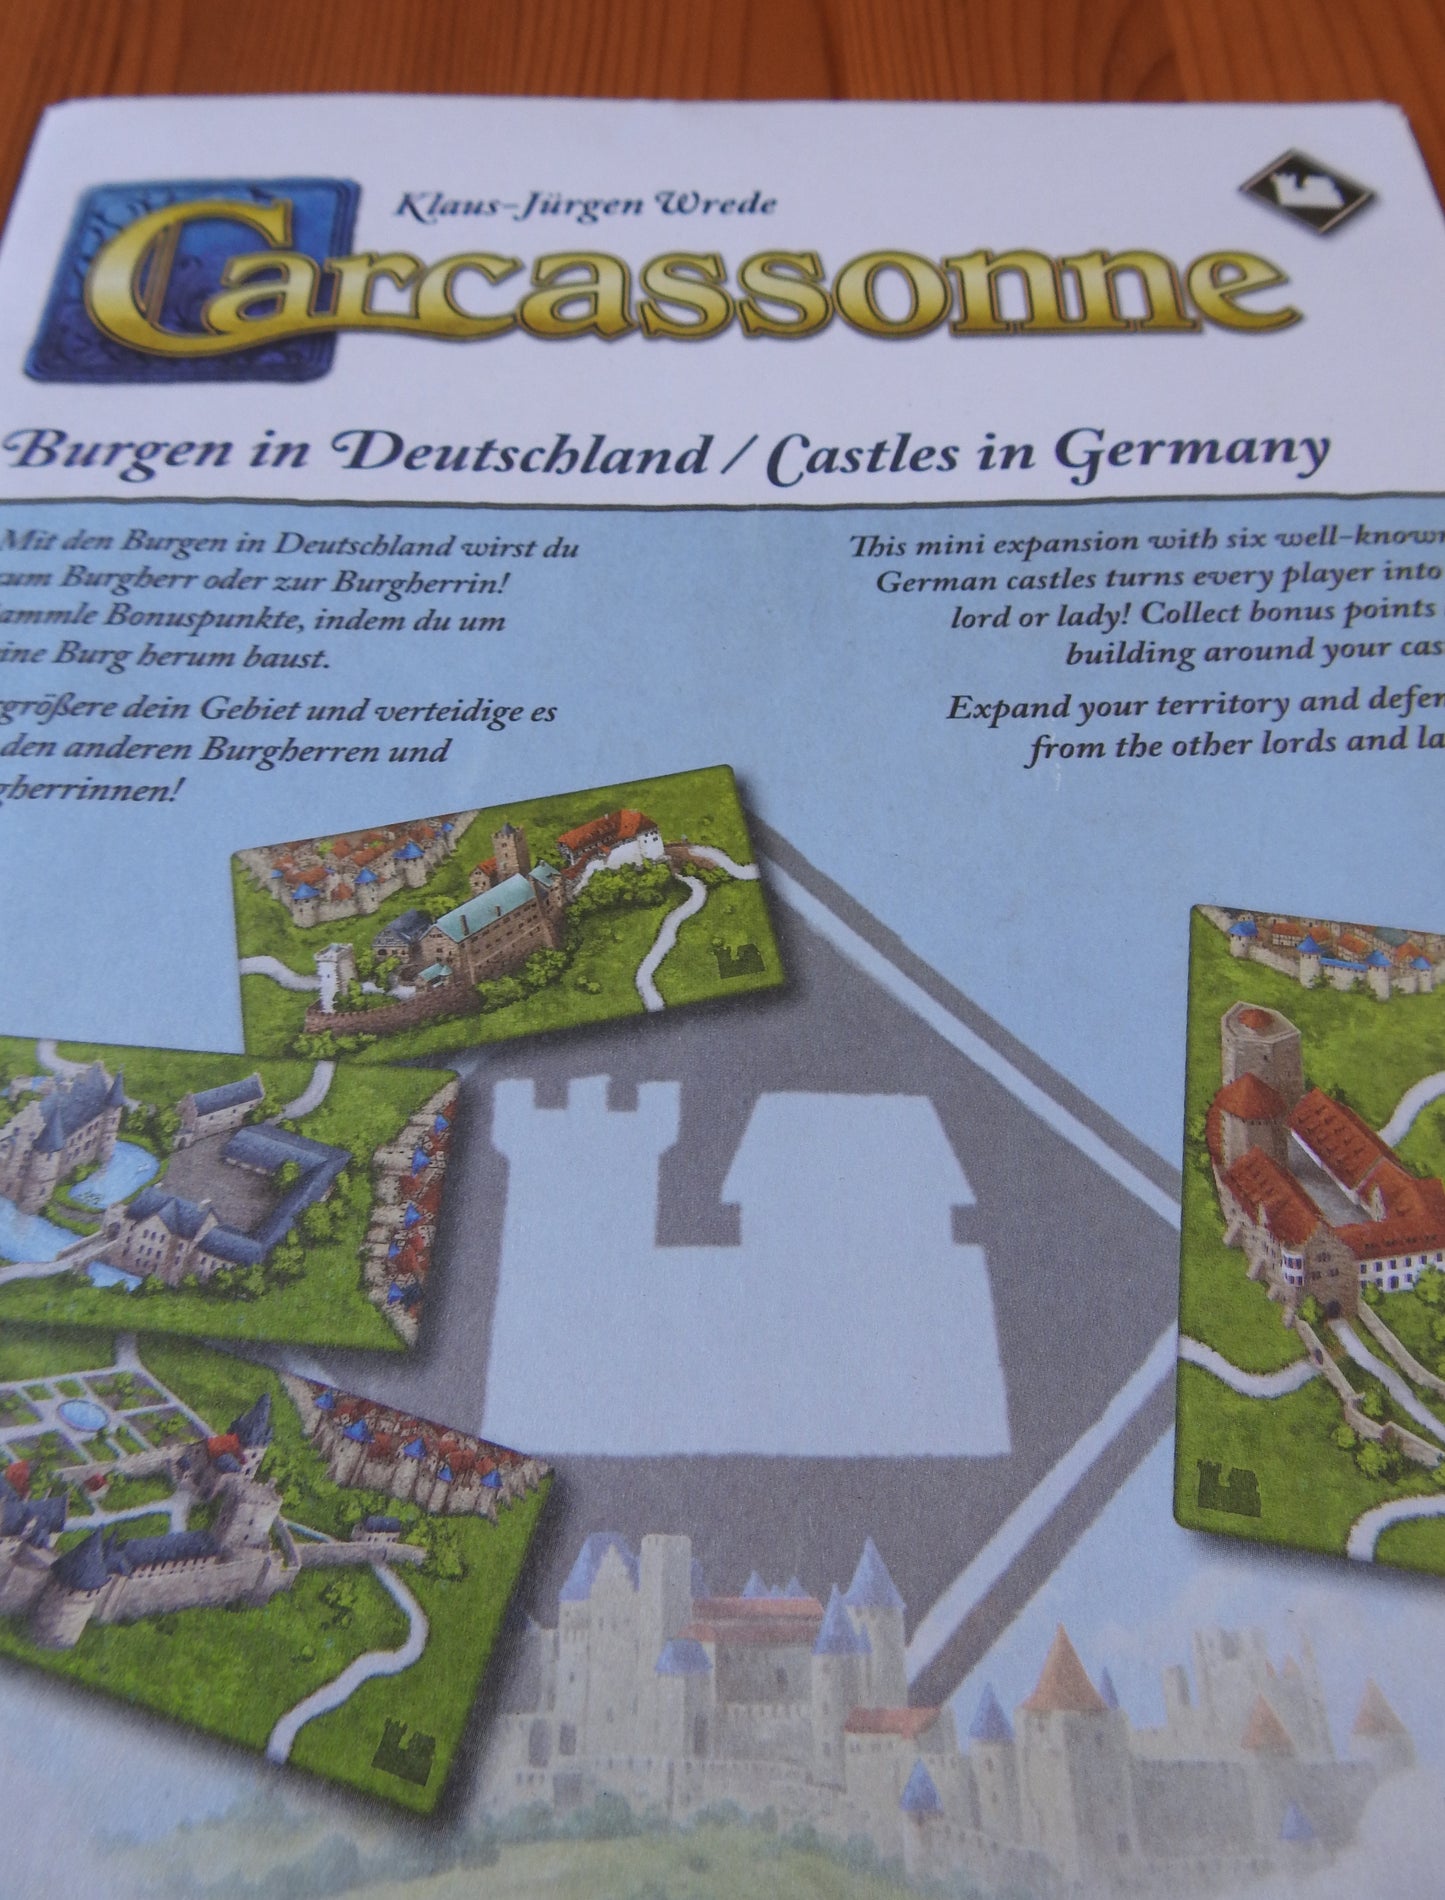 View of the large envelope that this German Castles mini expansion for Carcassonne comes in.